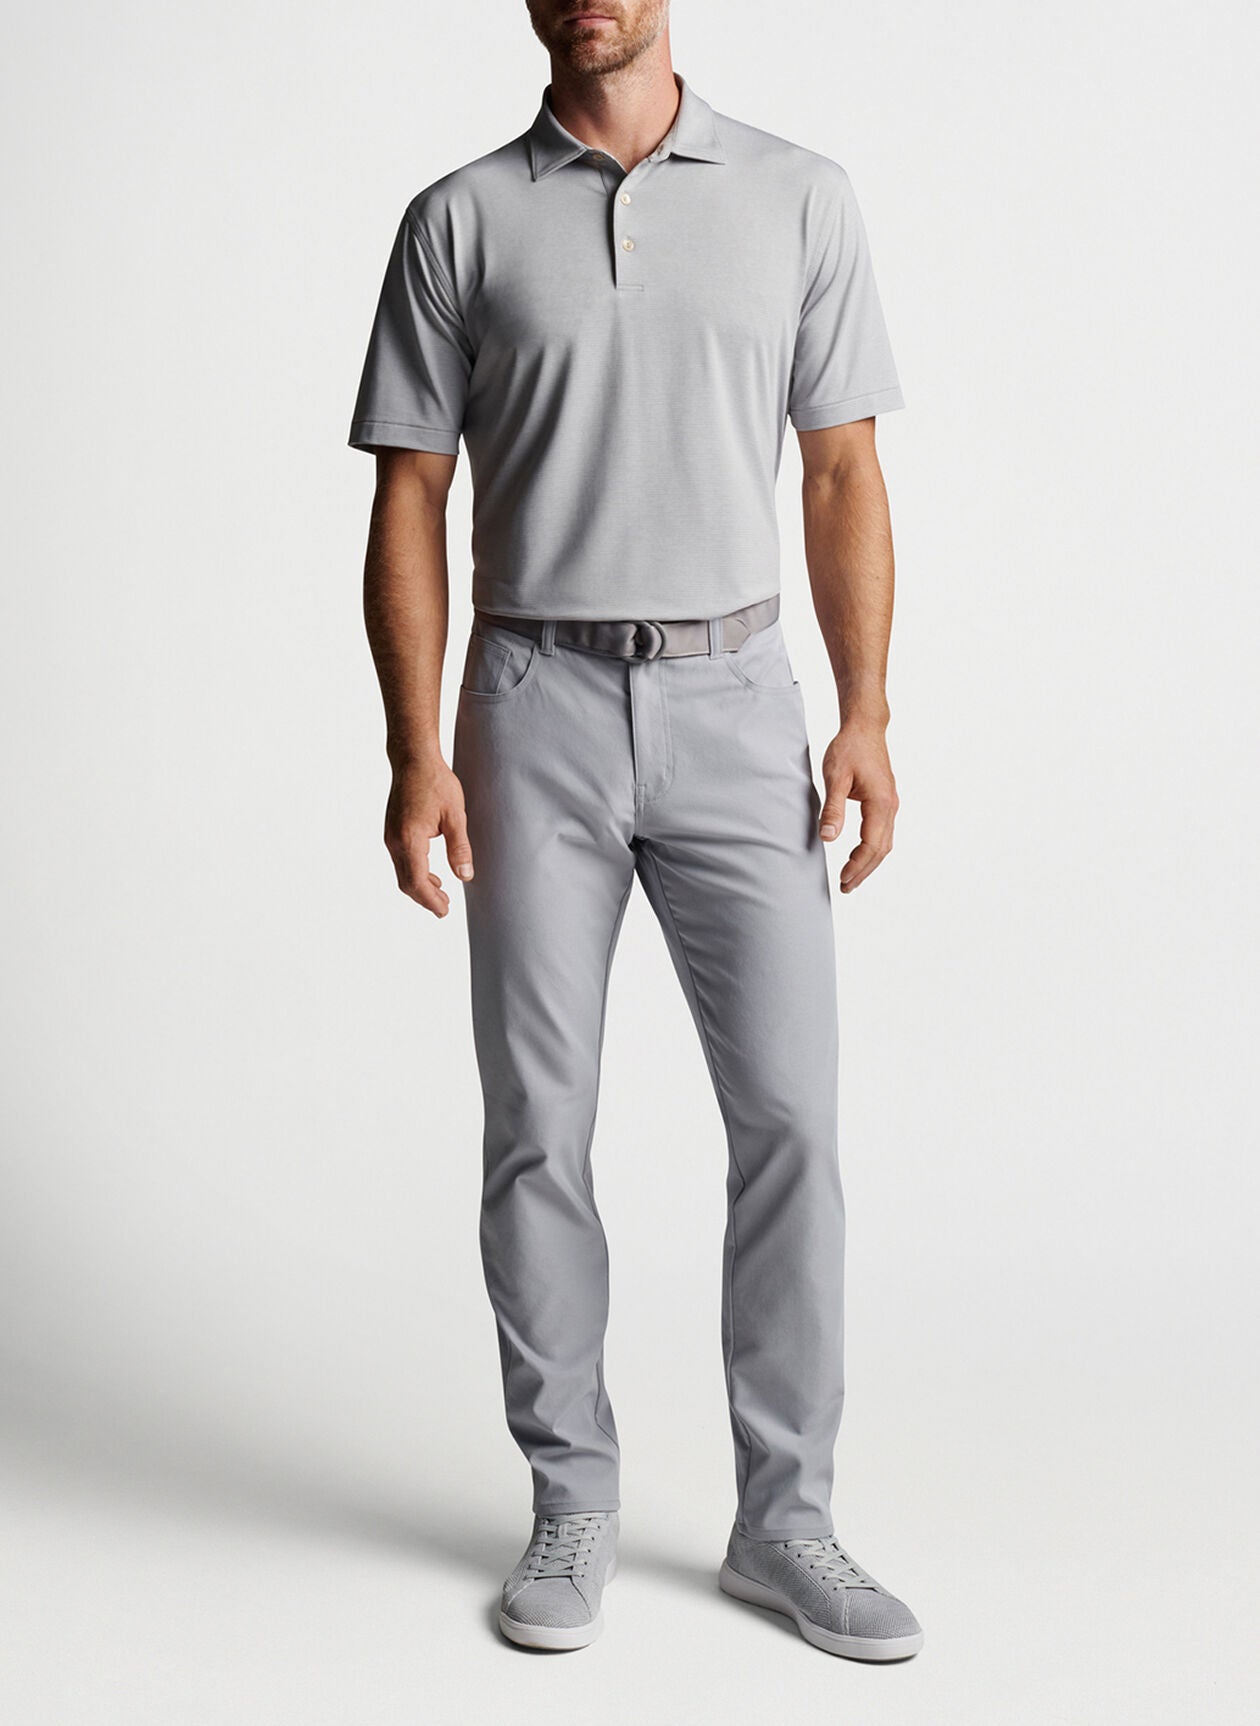 Peter Millar eb66 Performance Five Pocket Pant - Gale – The Lucky